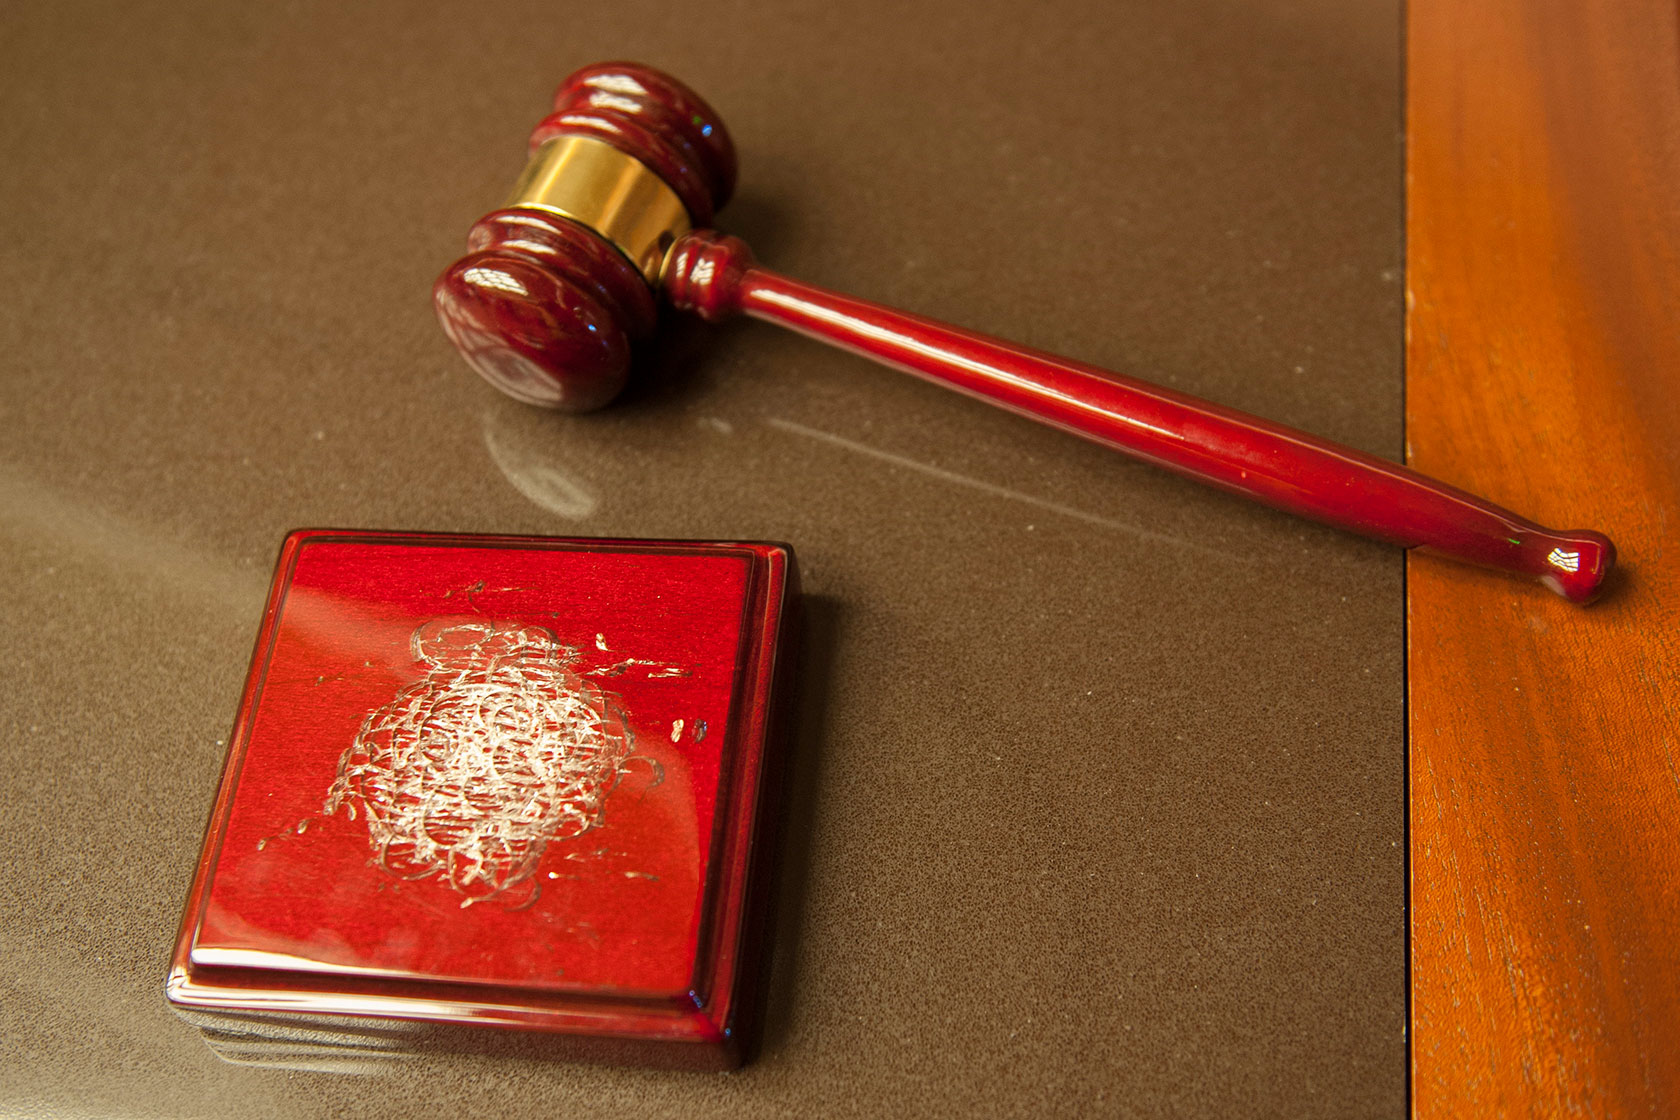 Photo shows a red gavel sitting next to a block with a worn spot where the gavel has struck it over the years